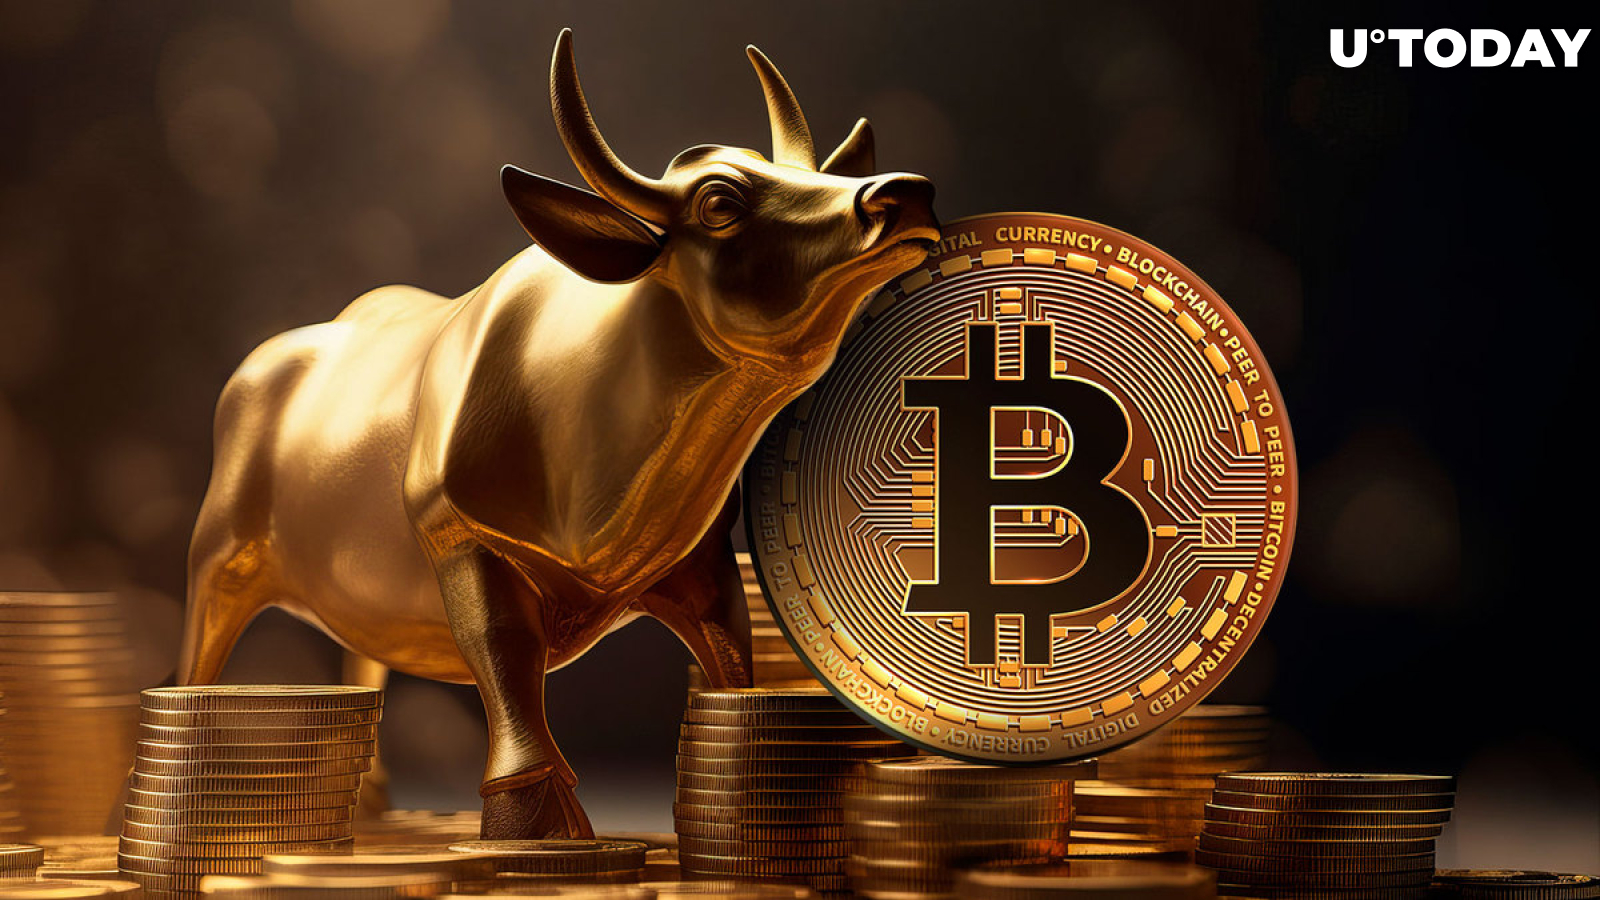 Bitcoin (BTC) Price History Secret: Here's Why This December Might Be Bullish